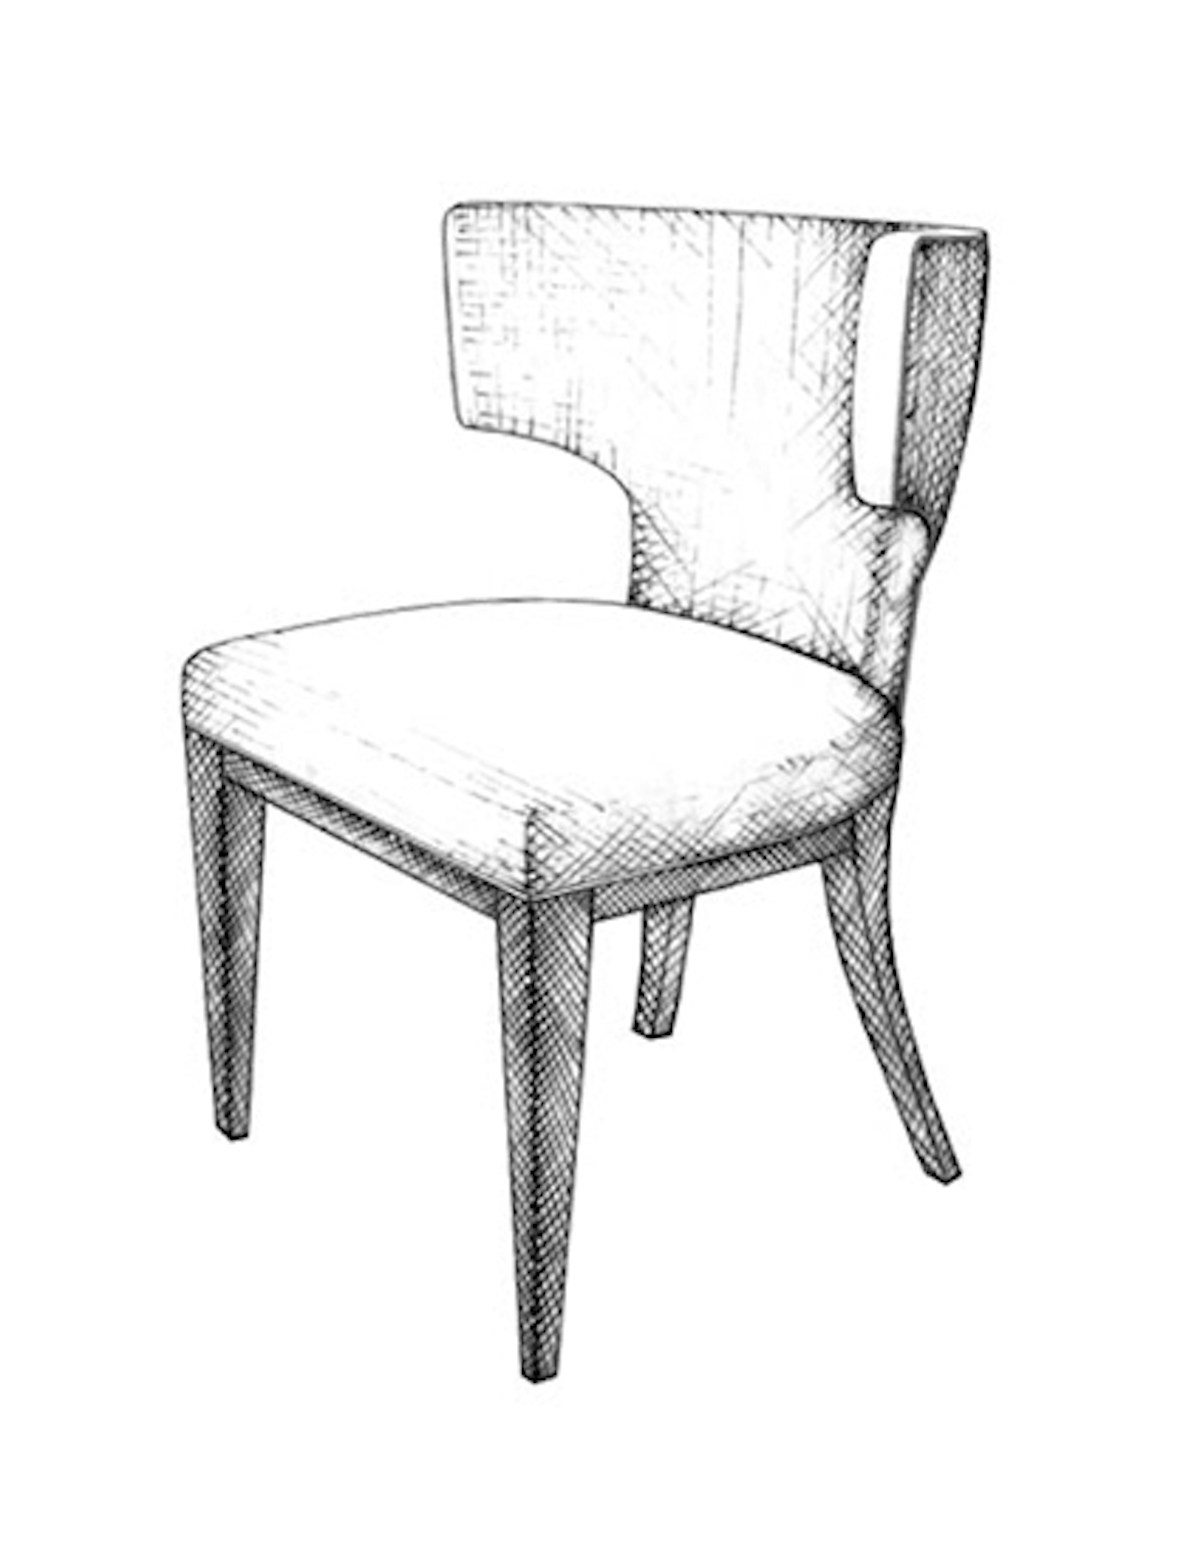 The Best of Chair Design - Top 10 Chair Styles - Klismos-style accent chair